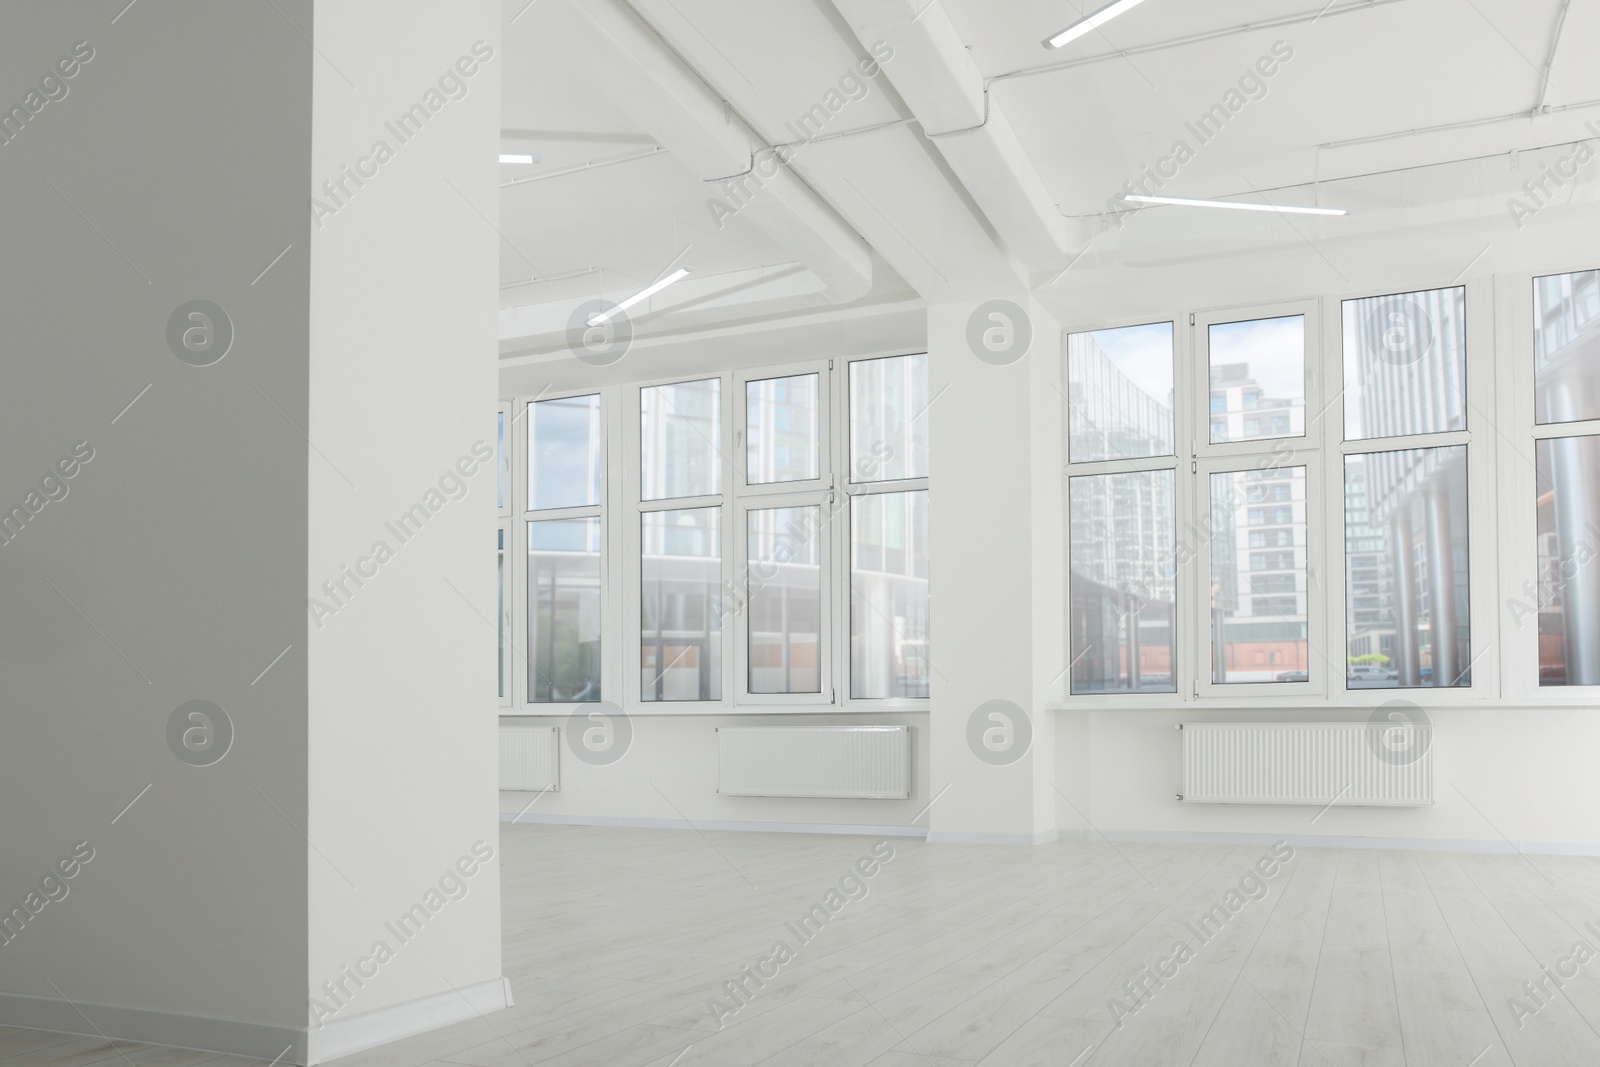 Photo of Modern office room with white walls and windows. Interior design